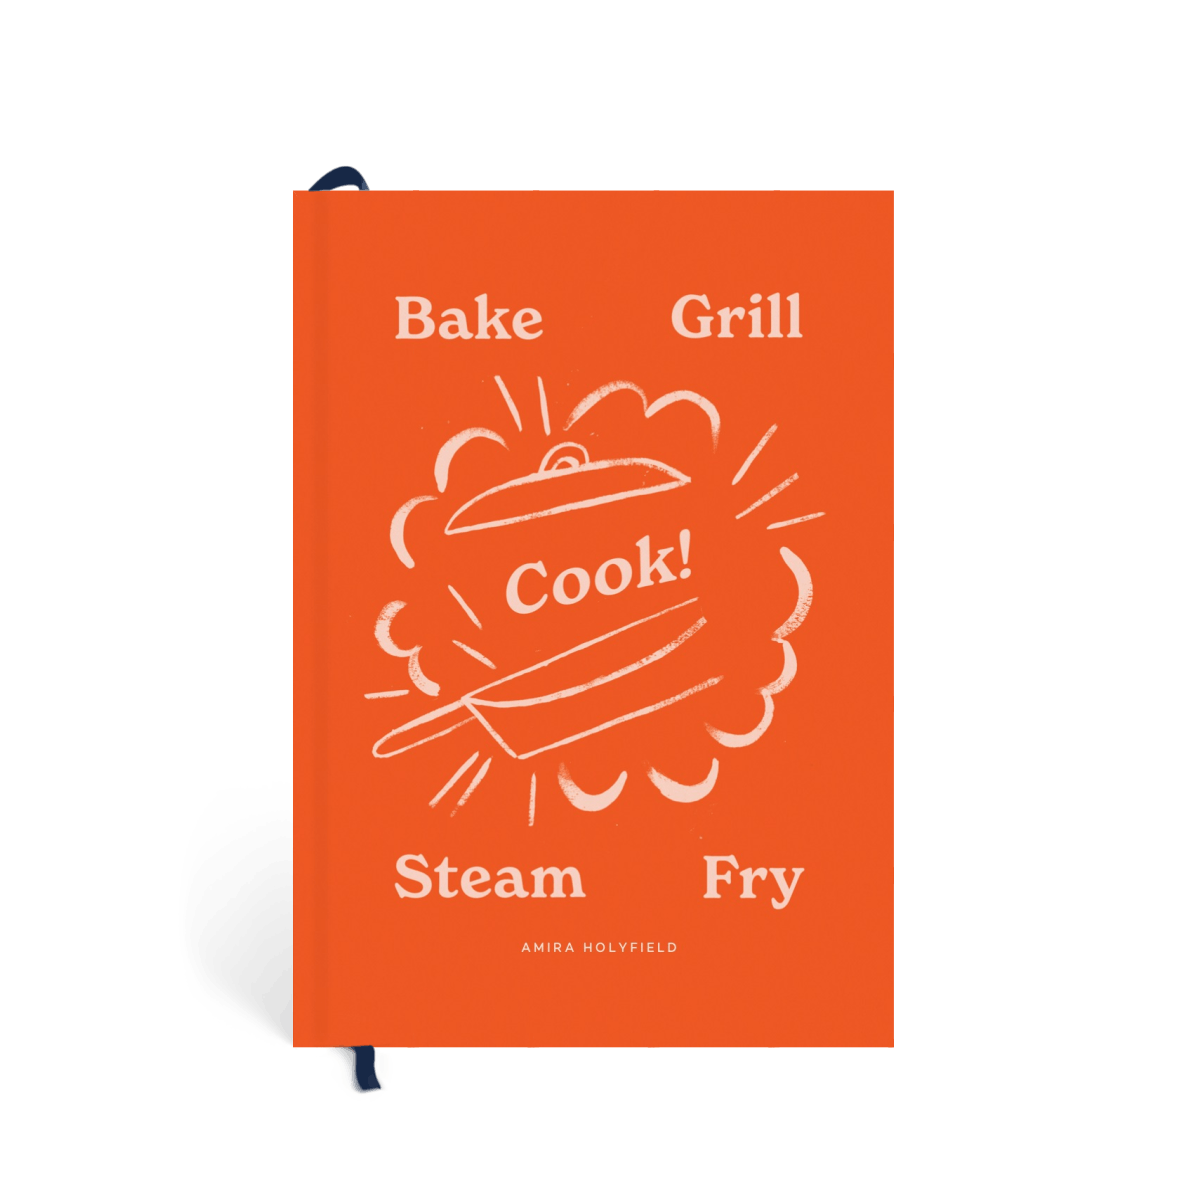 Bake and Grill